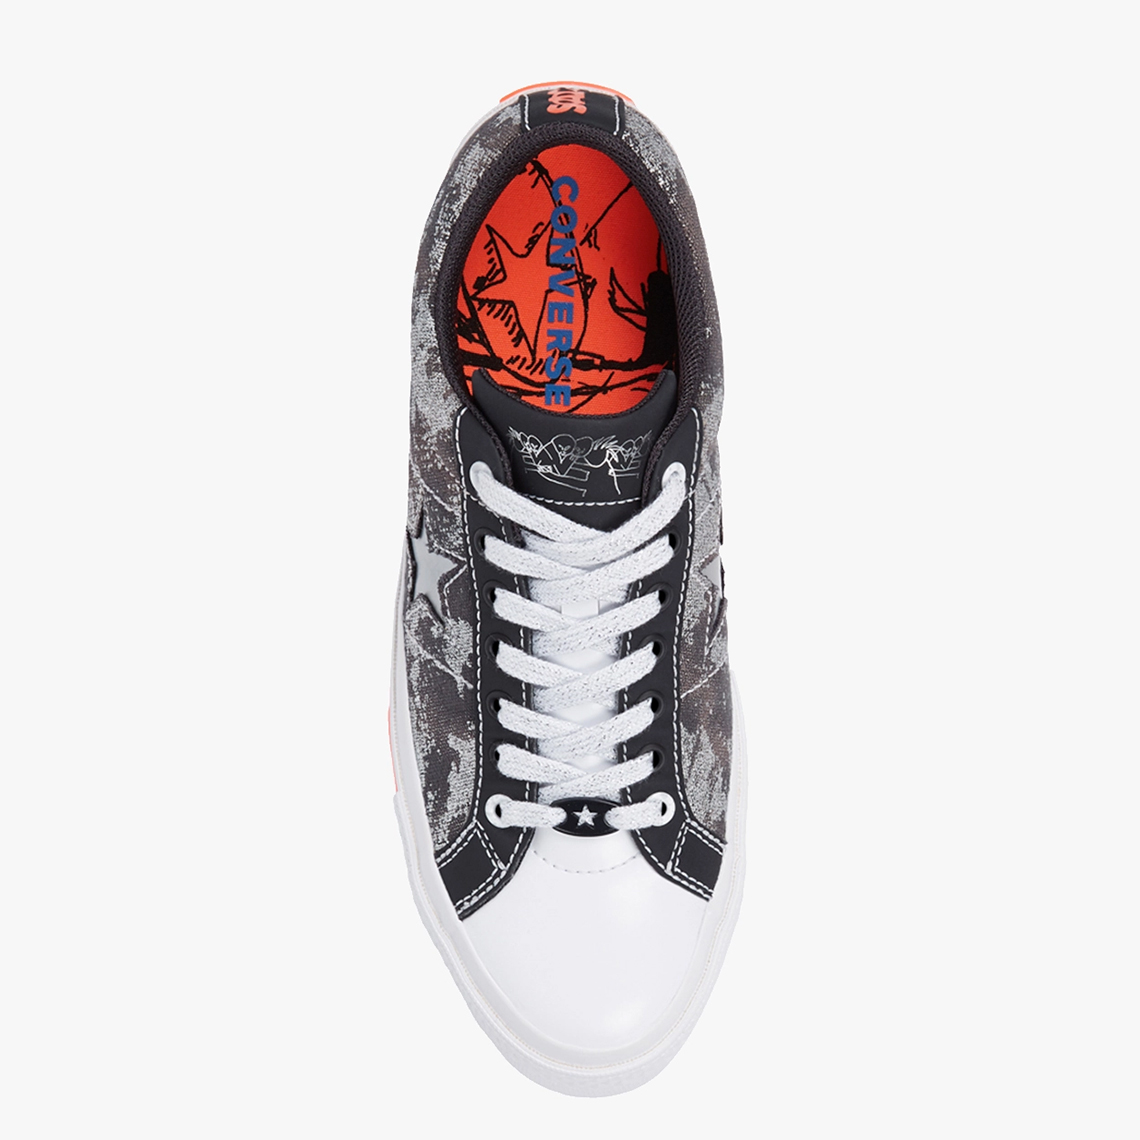 Yung Lean Converse One Star Sad Boys Release Date | SneakerNews.com